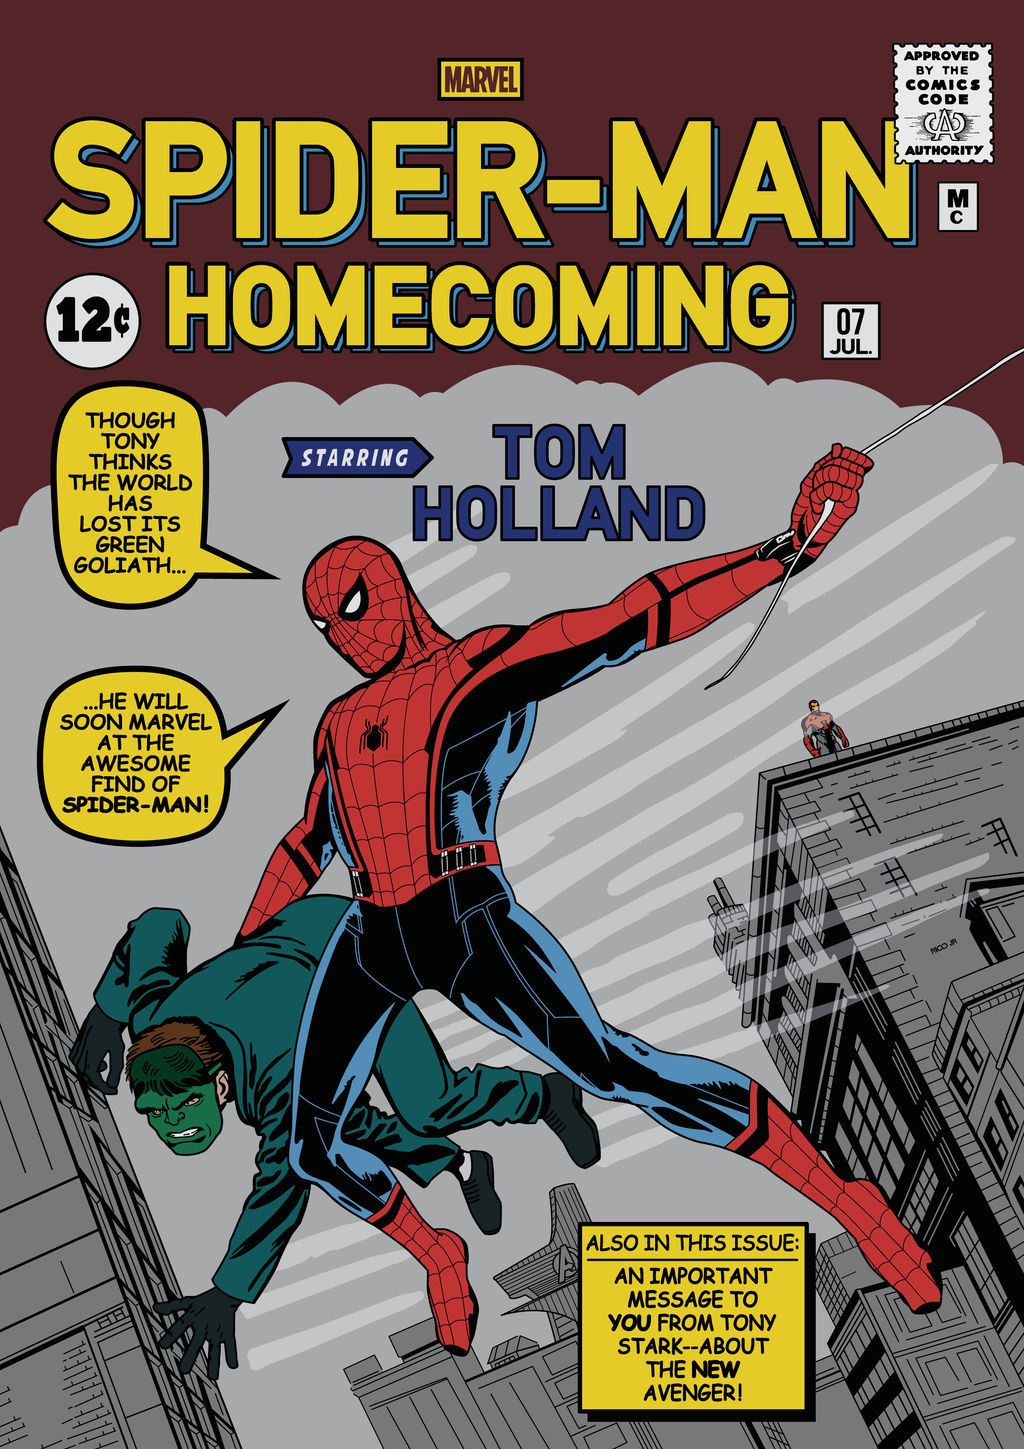 SPIDER-MAN: HOMECOMING Tribute Cover by RicoJrCreation on DeviantArt